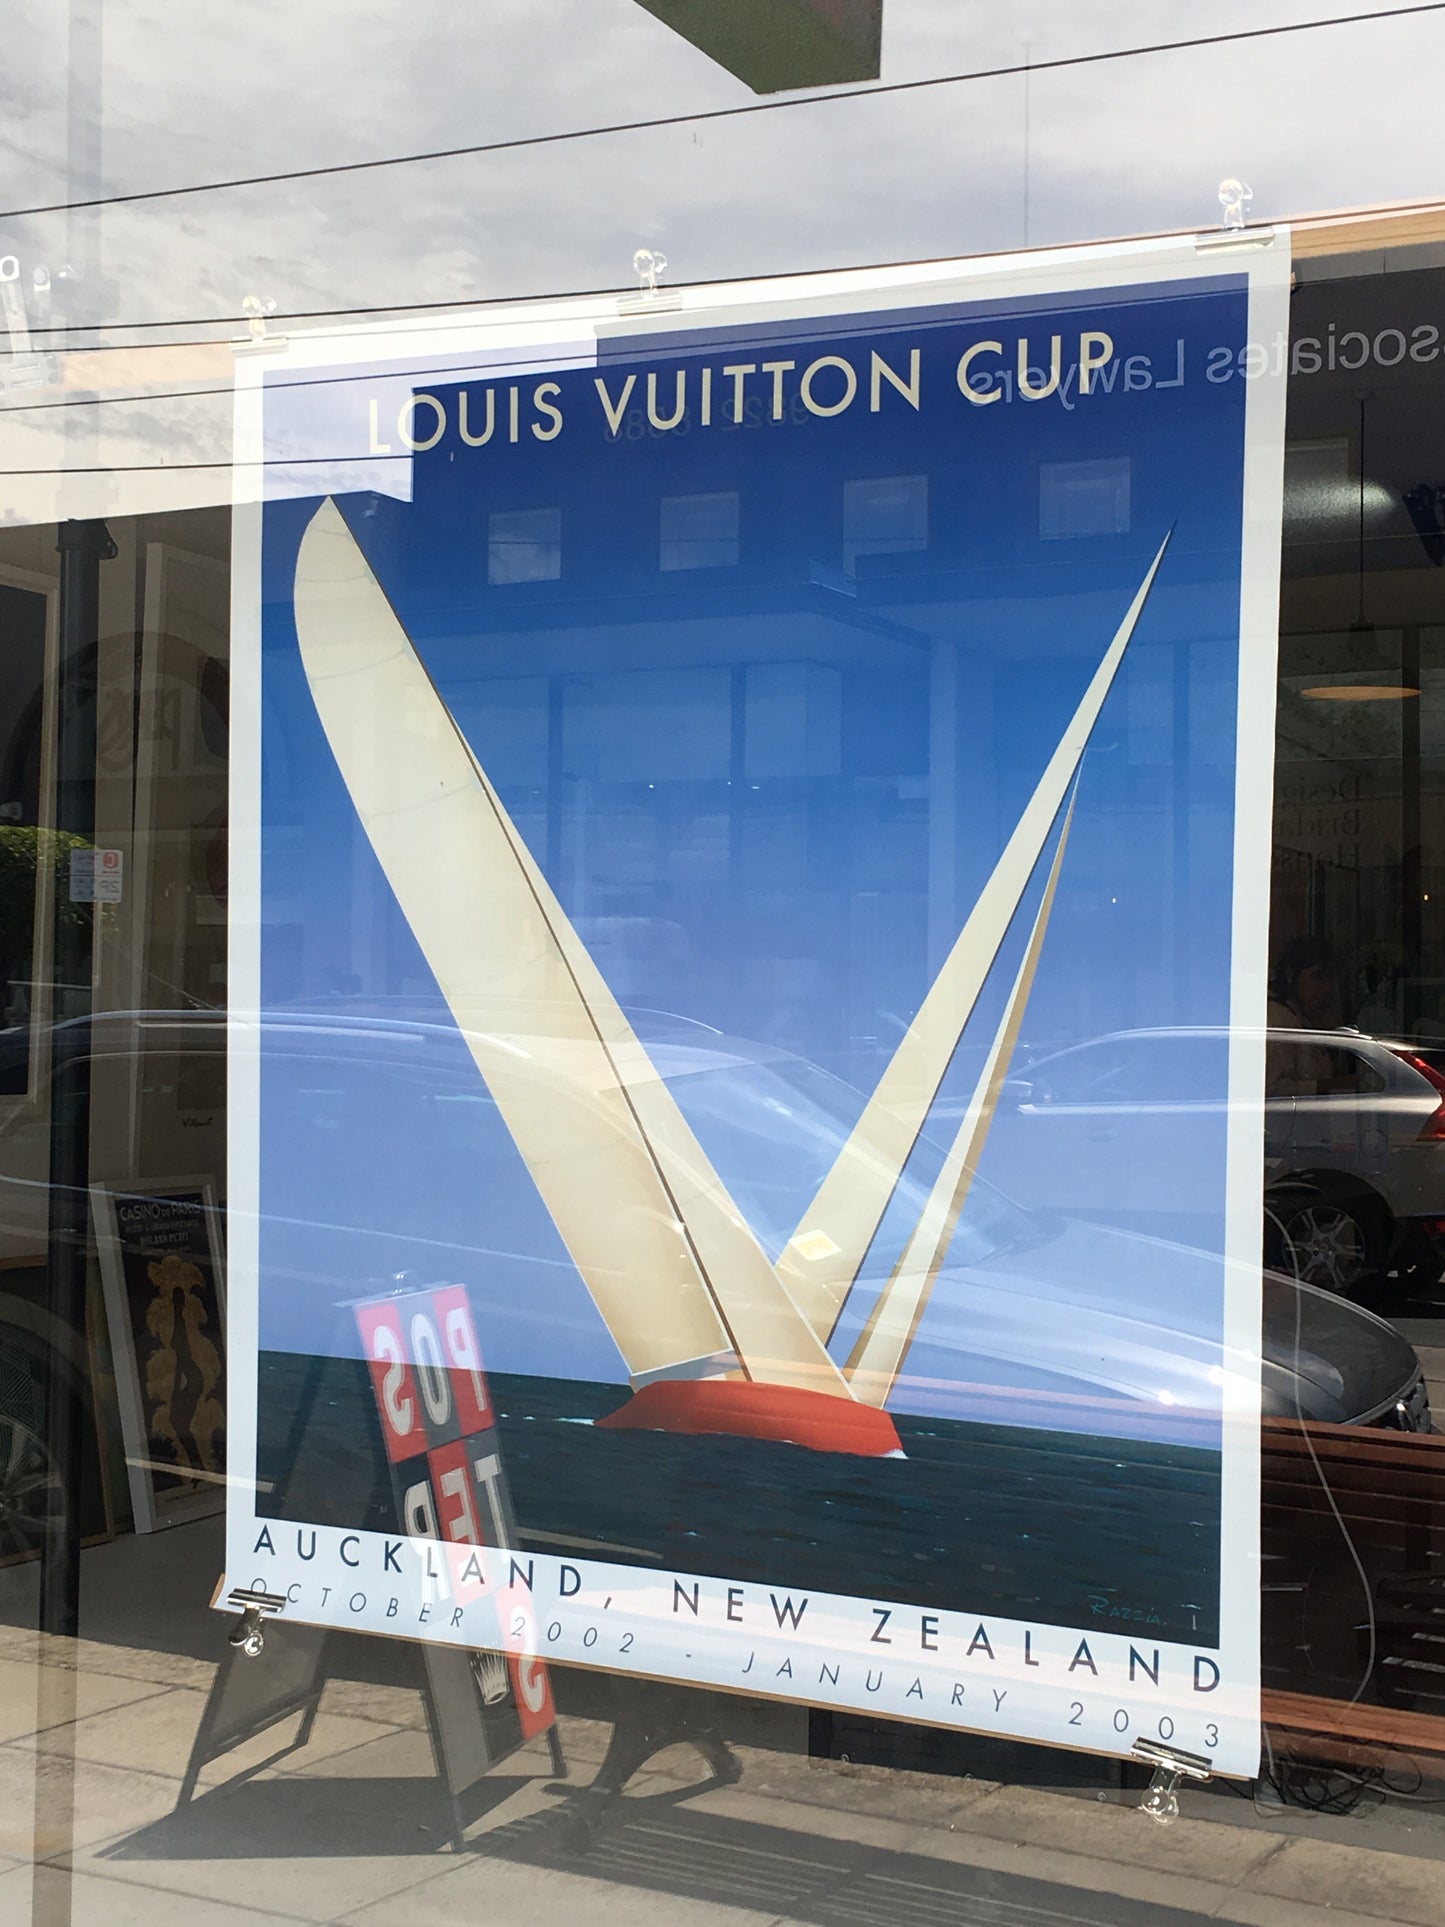 Louis Vuitton Cup New Zealand by Razzia